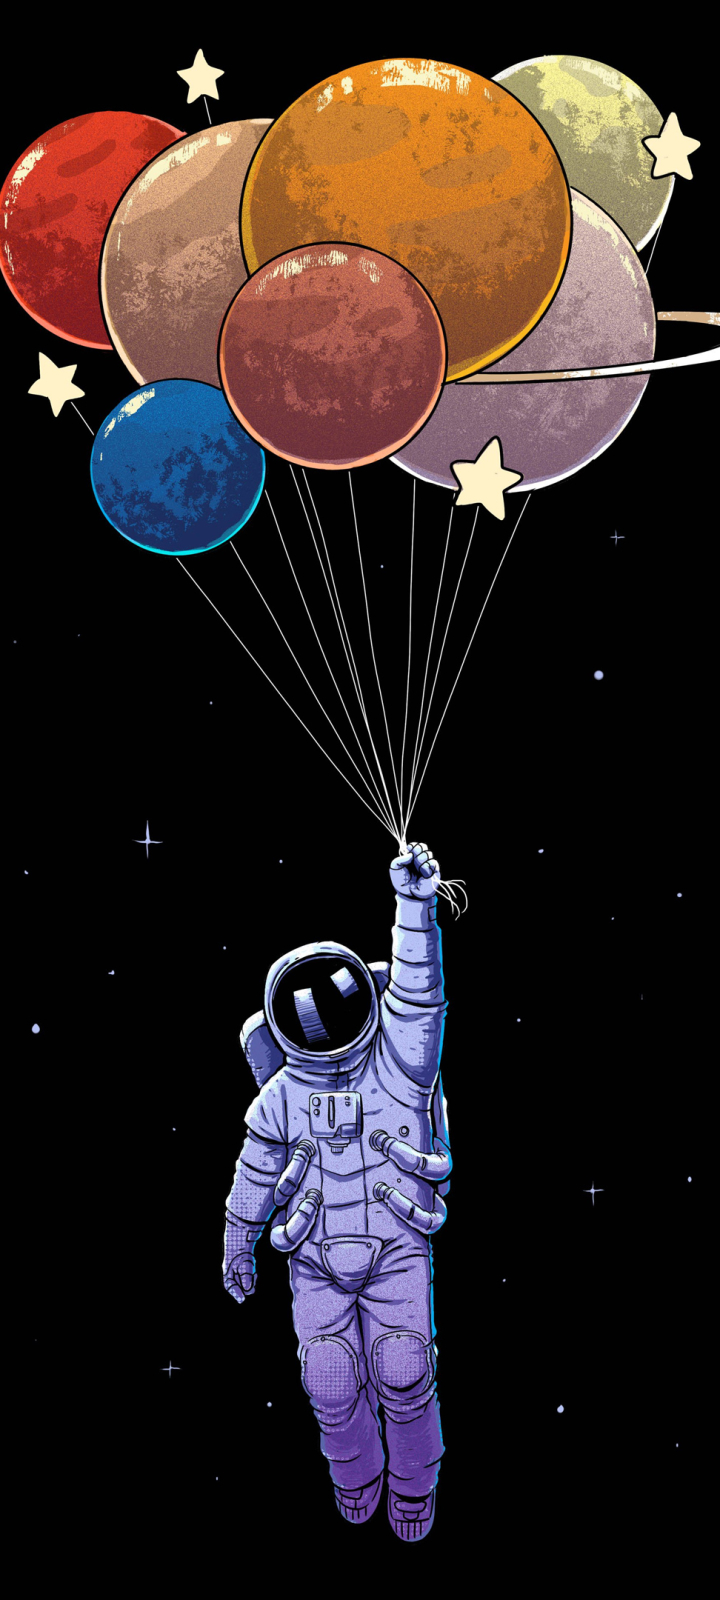 Astronaut Holding Bunch of Colorful Balloons